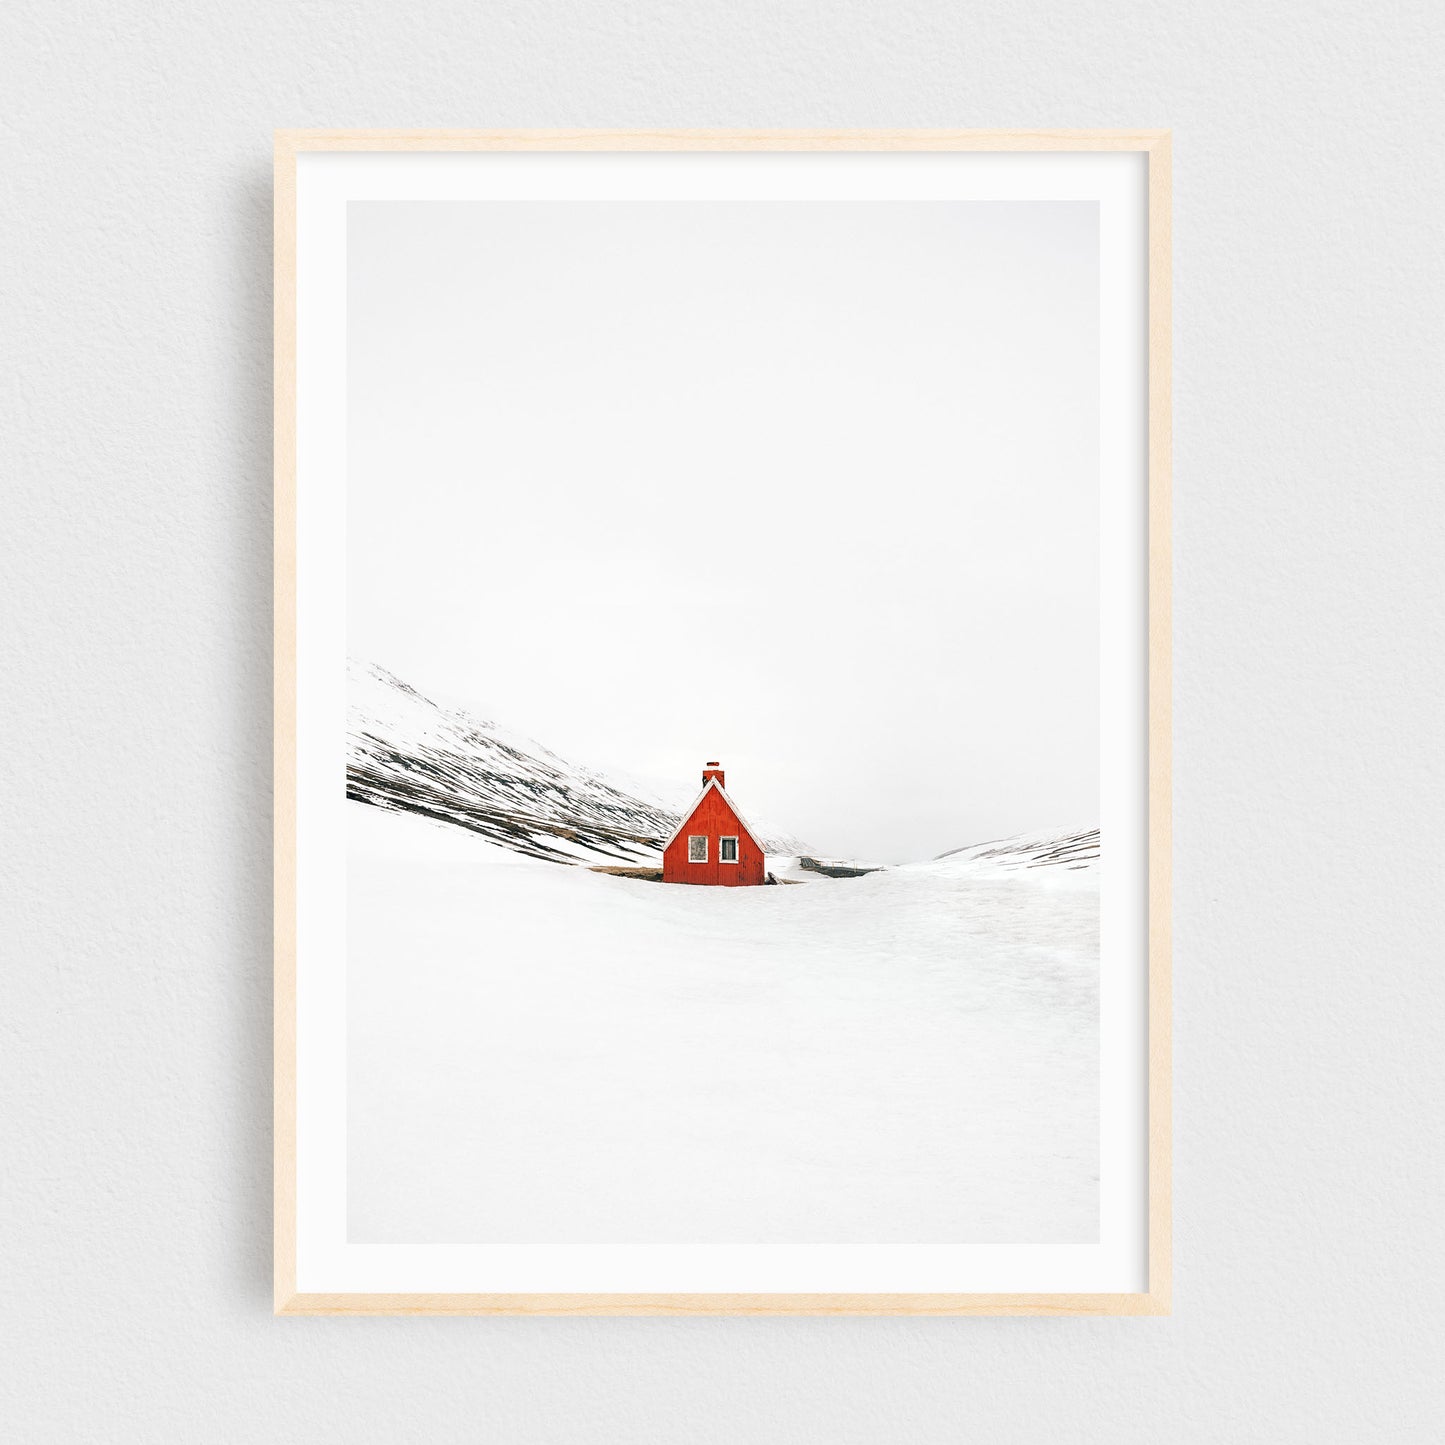 Iceland fine art photography print featuring a red cabin in winter, in a maple frame